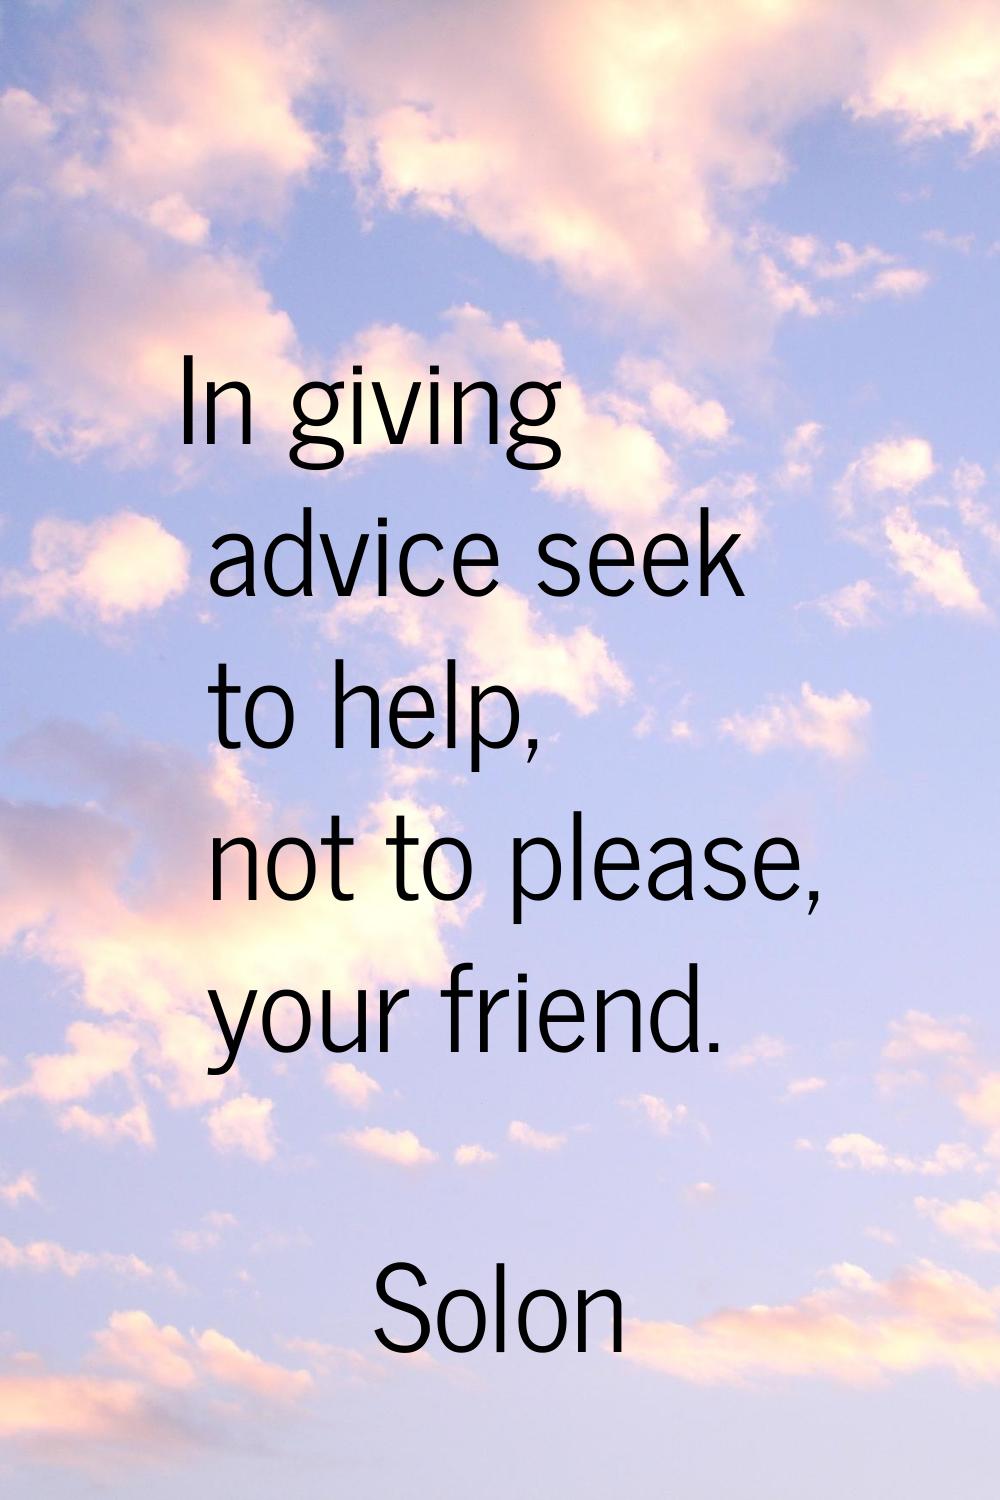 In giving advice seek to help, not to please, your friend.